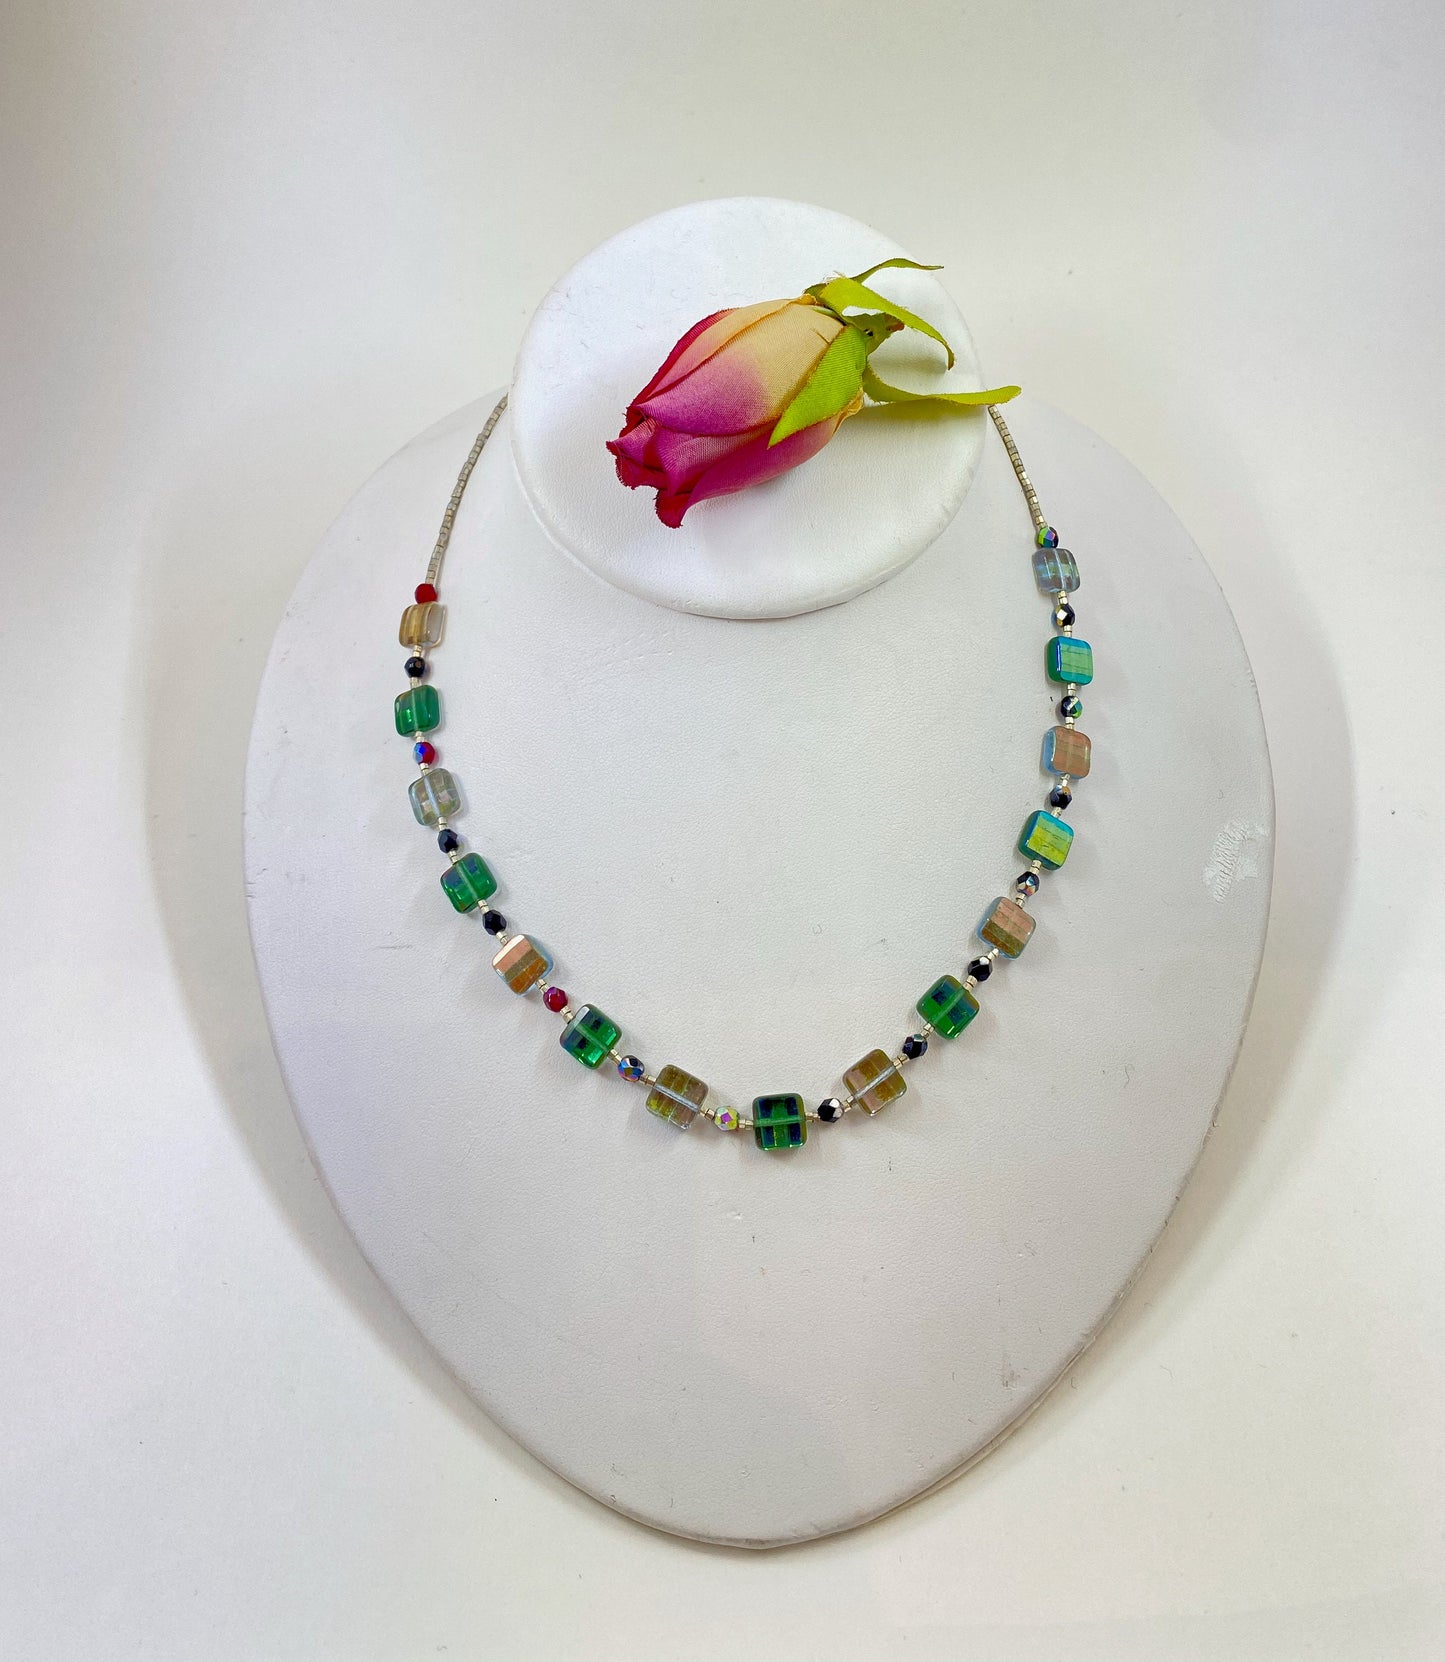 Swarovski crystal necklace. Stunning Swarovski crystals and beautiful glass beads are finished with a quality sterling silver chain.